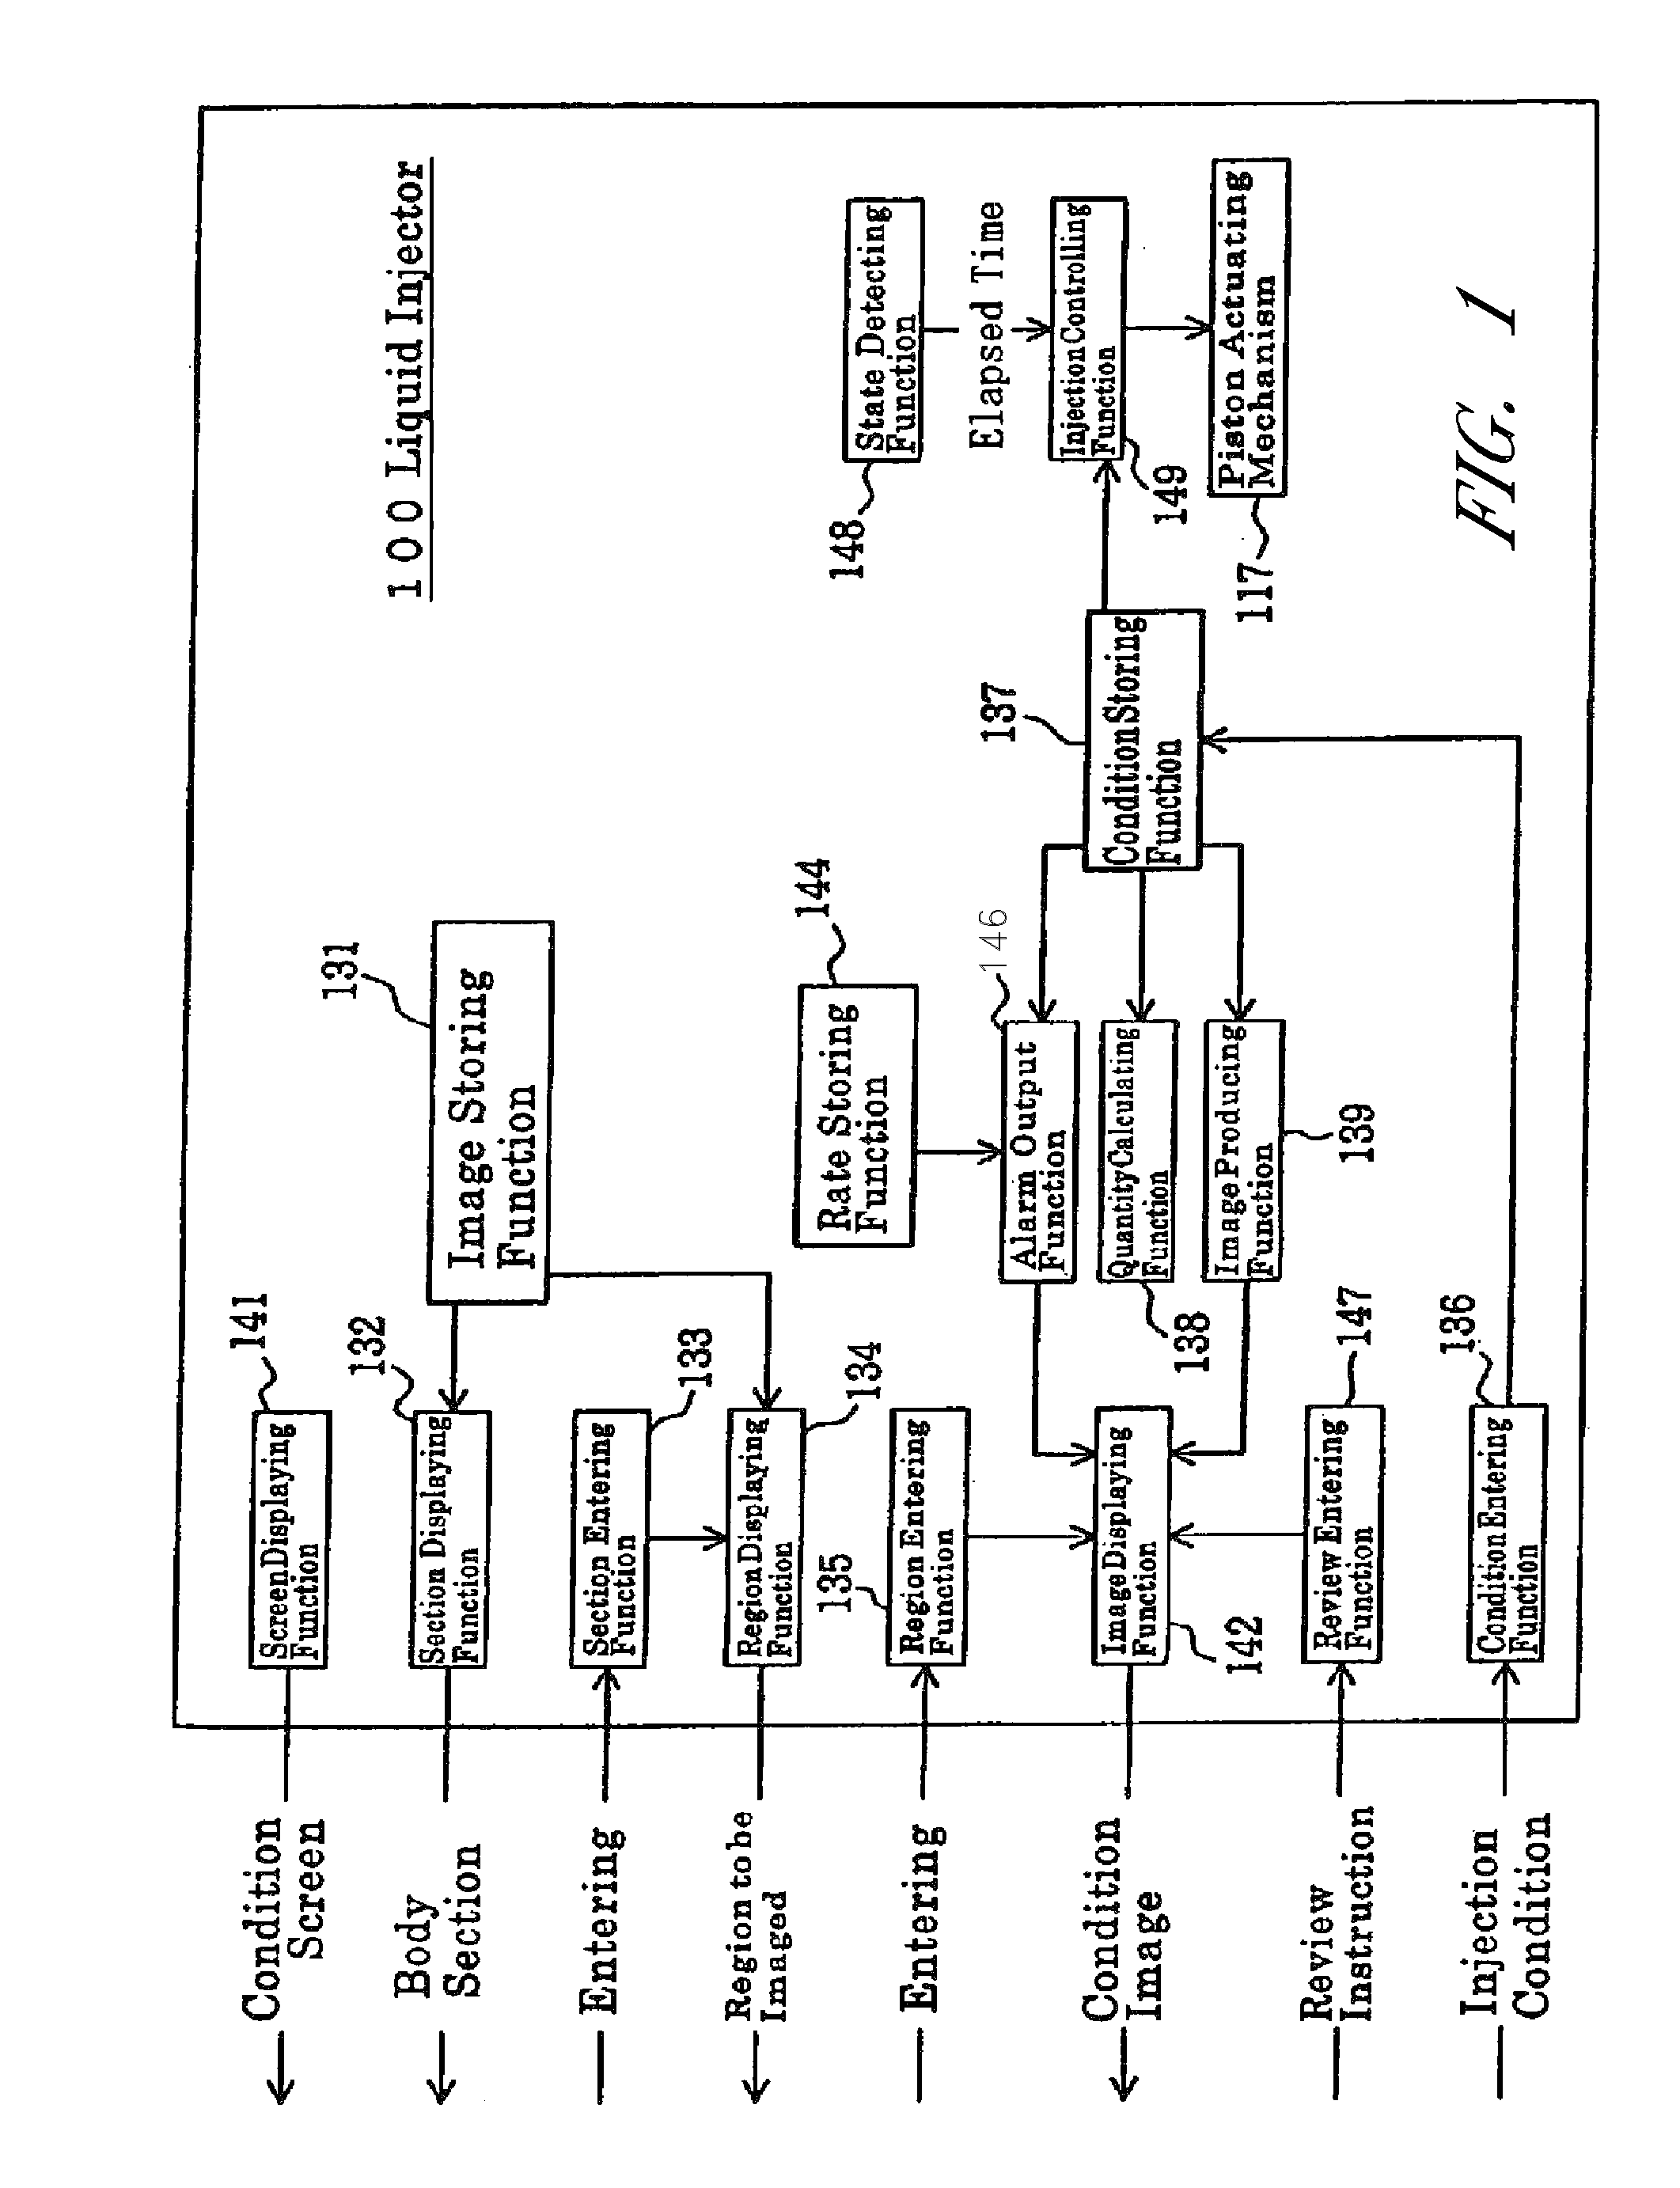 Liquid injector displaying input injection condition as image